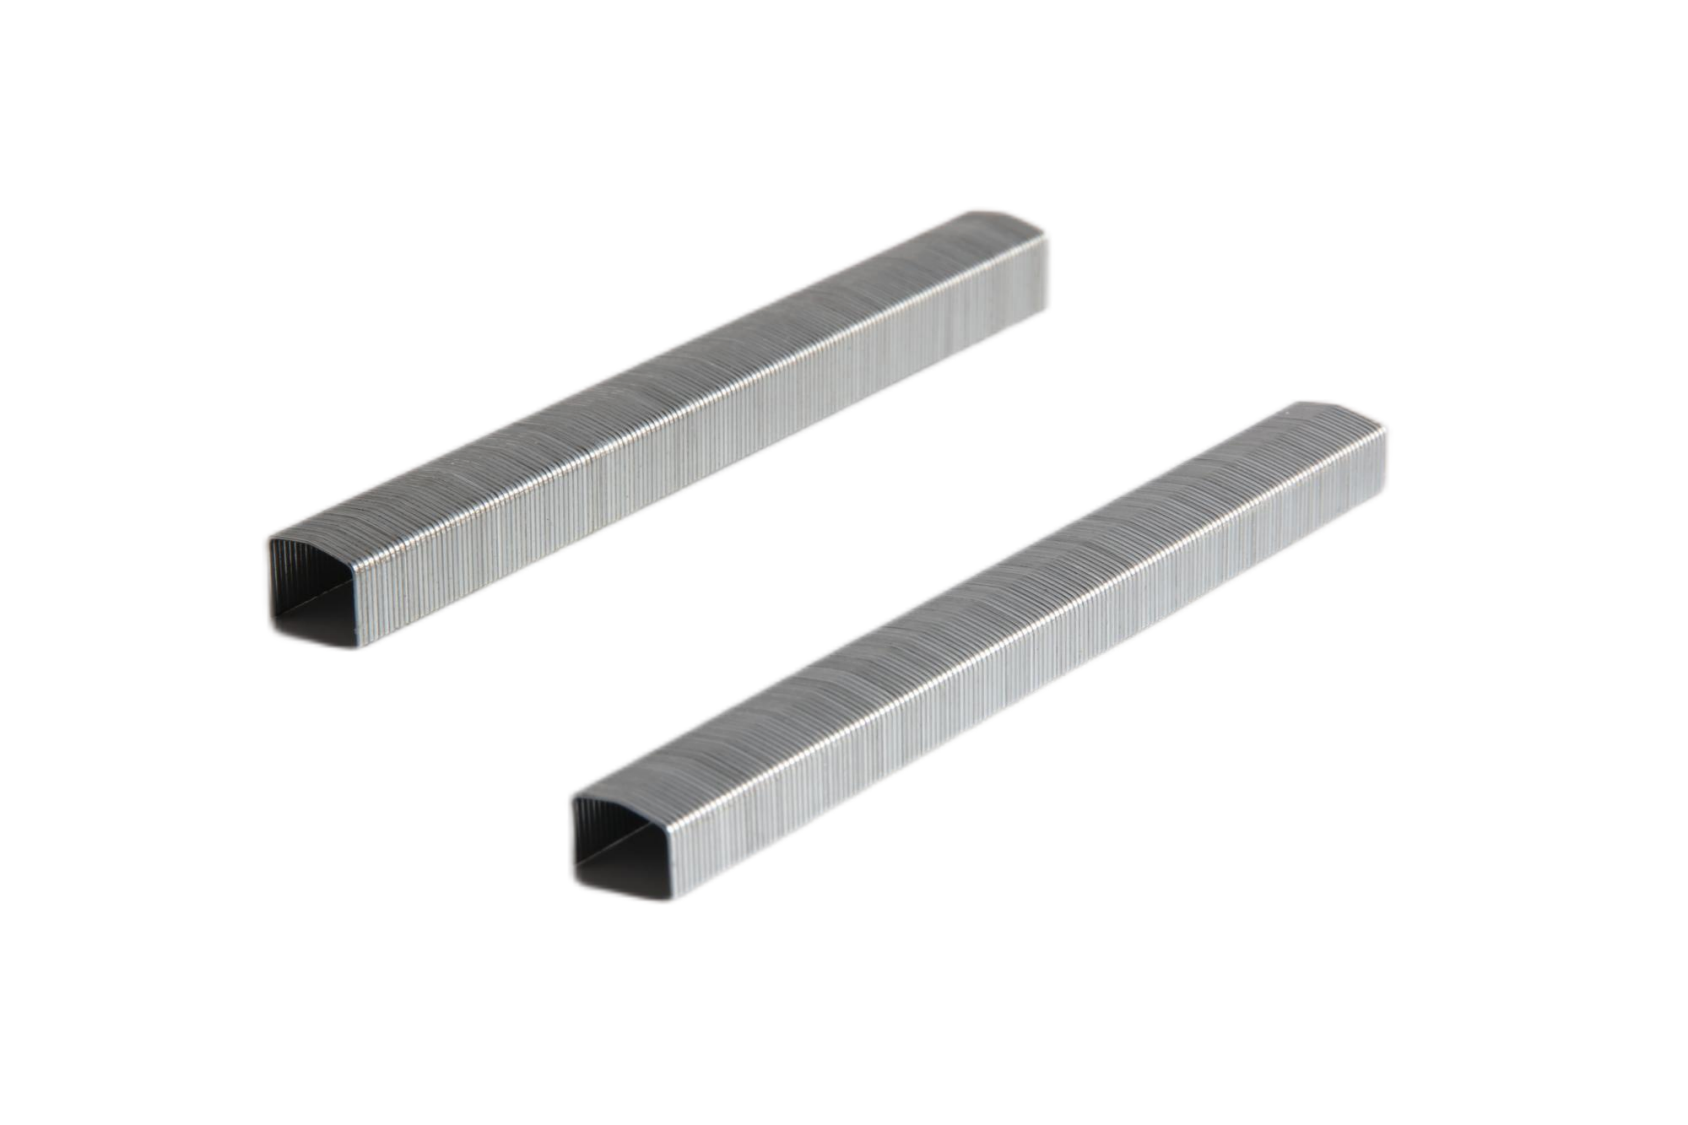 Galvanized STCR Staples Series For Wood